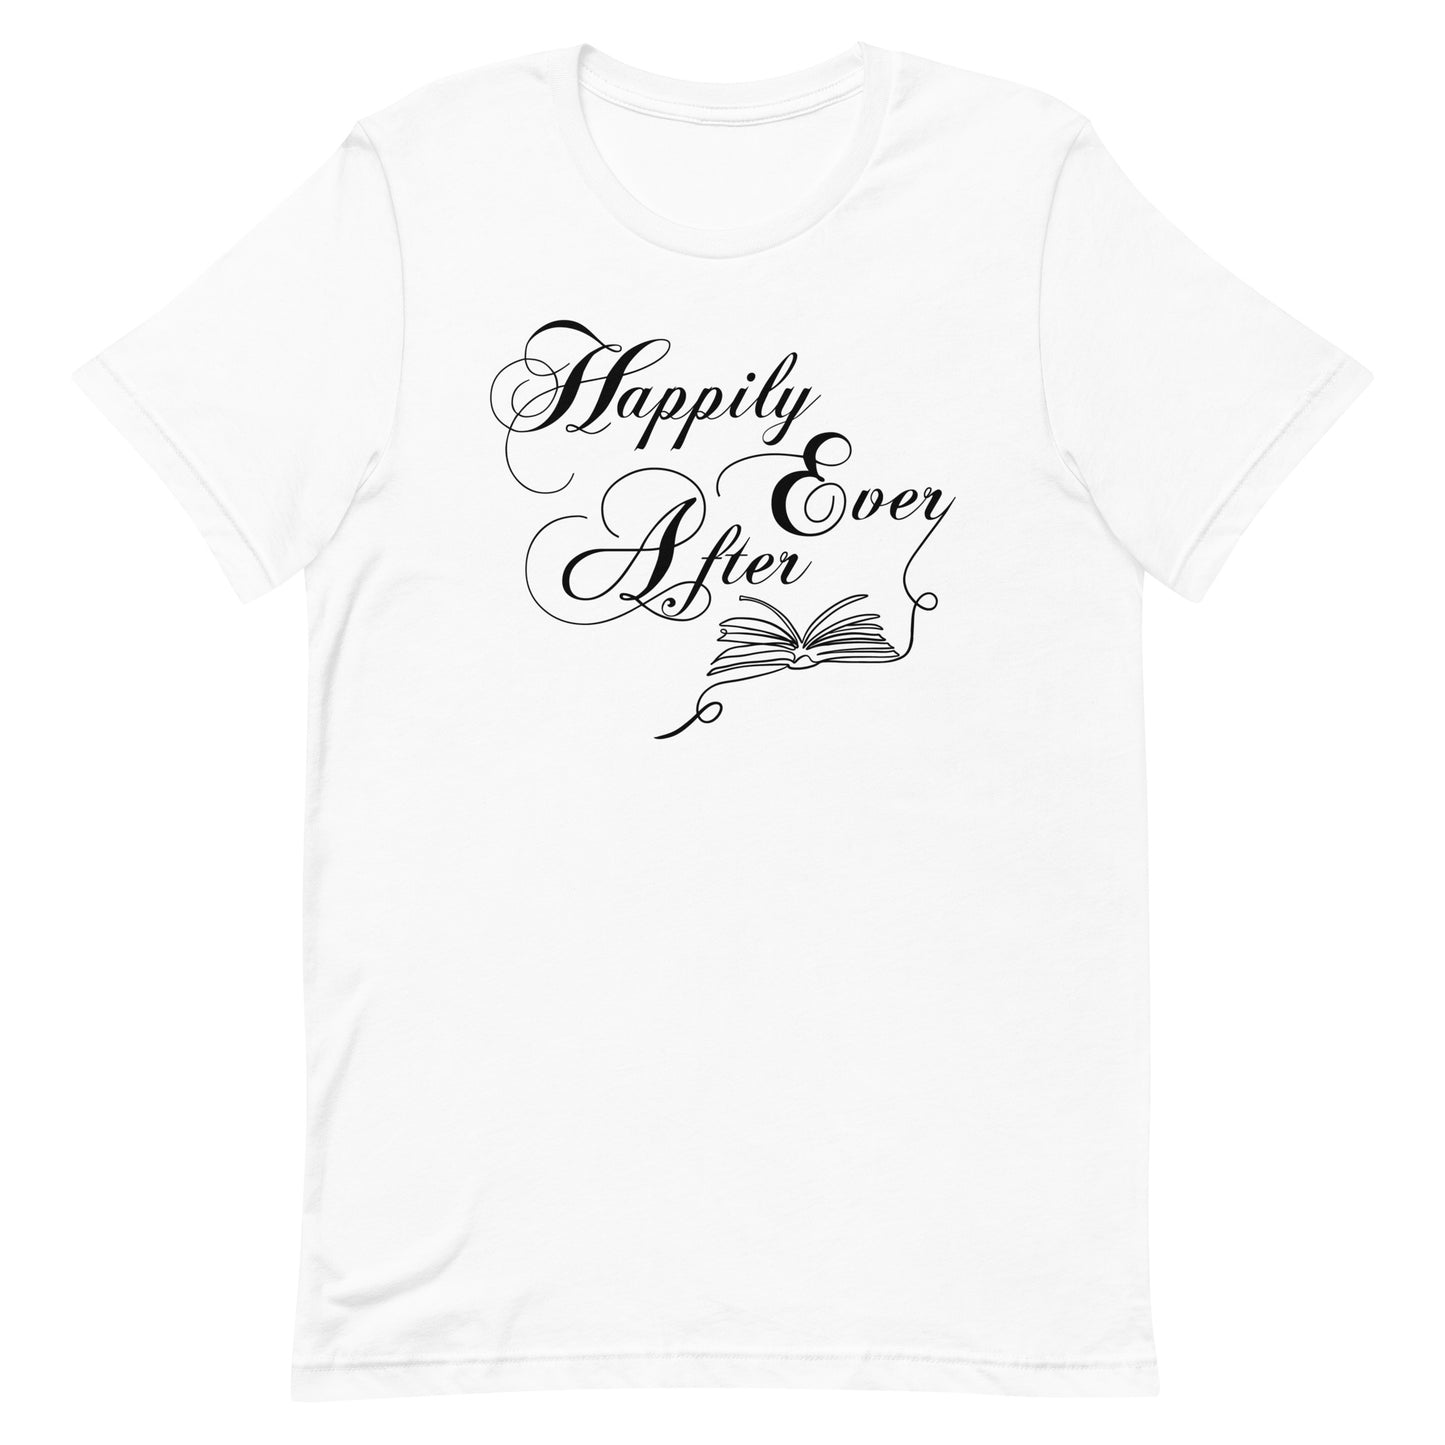 Happily Ever After HEA Romance Book Trope Tote bag